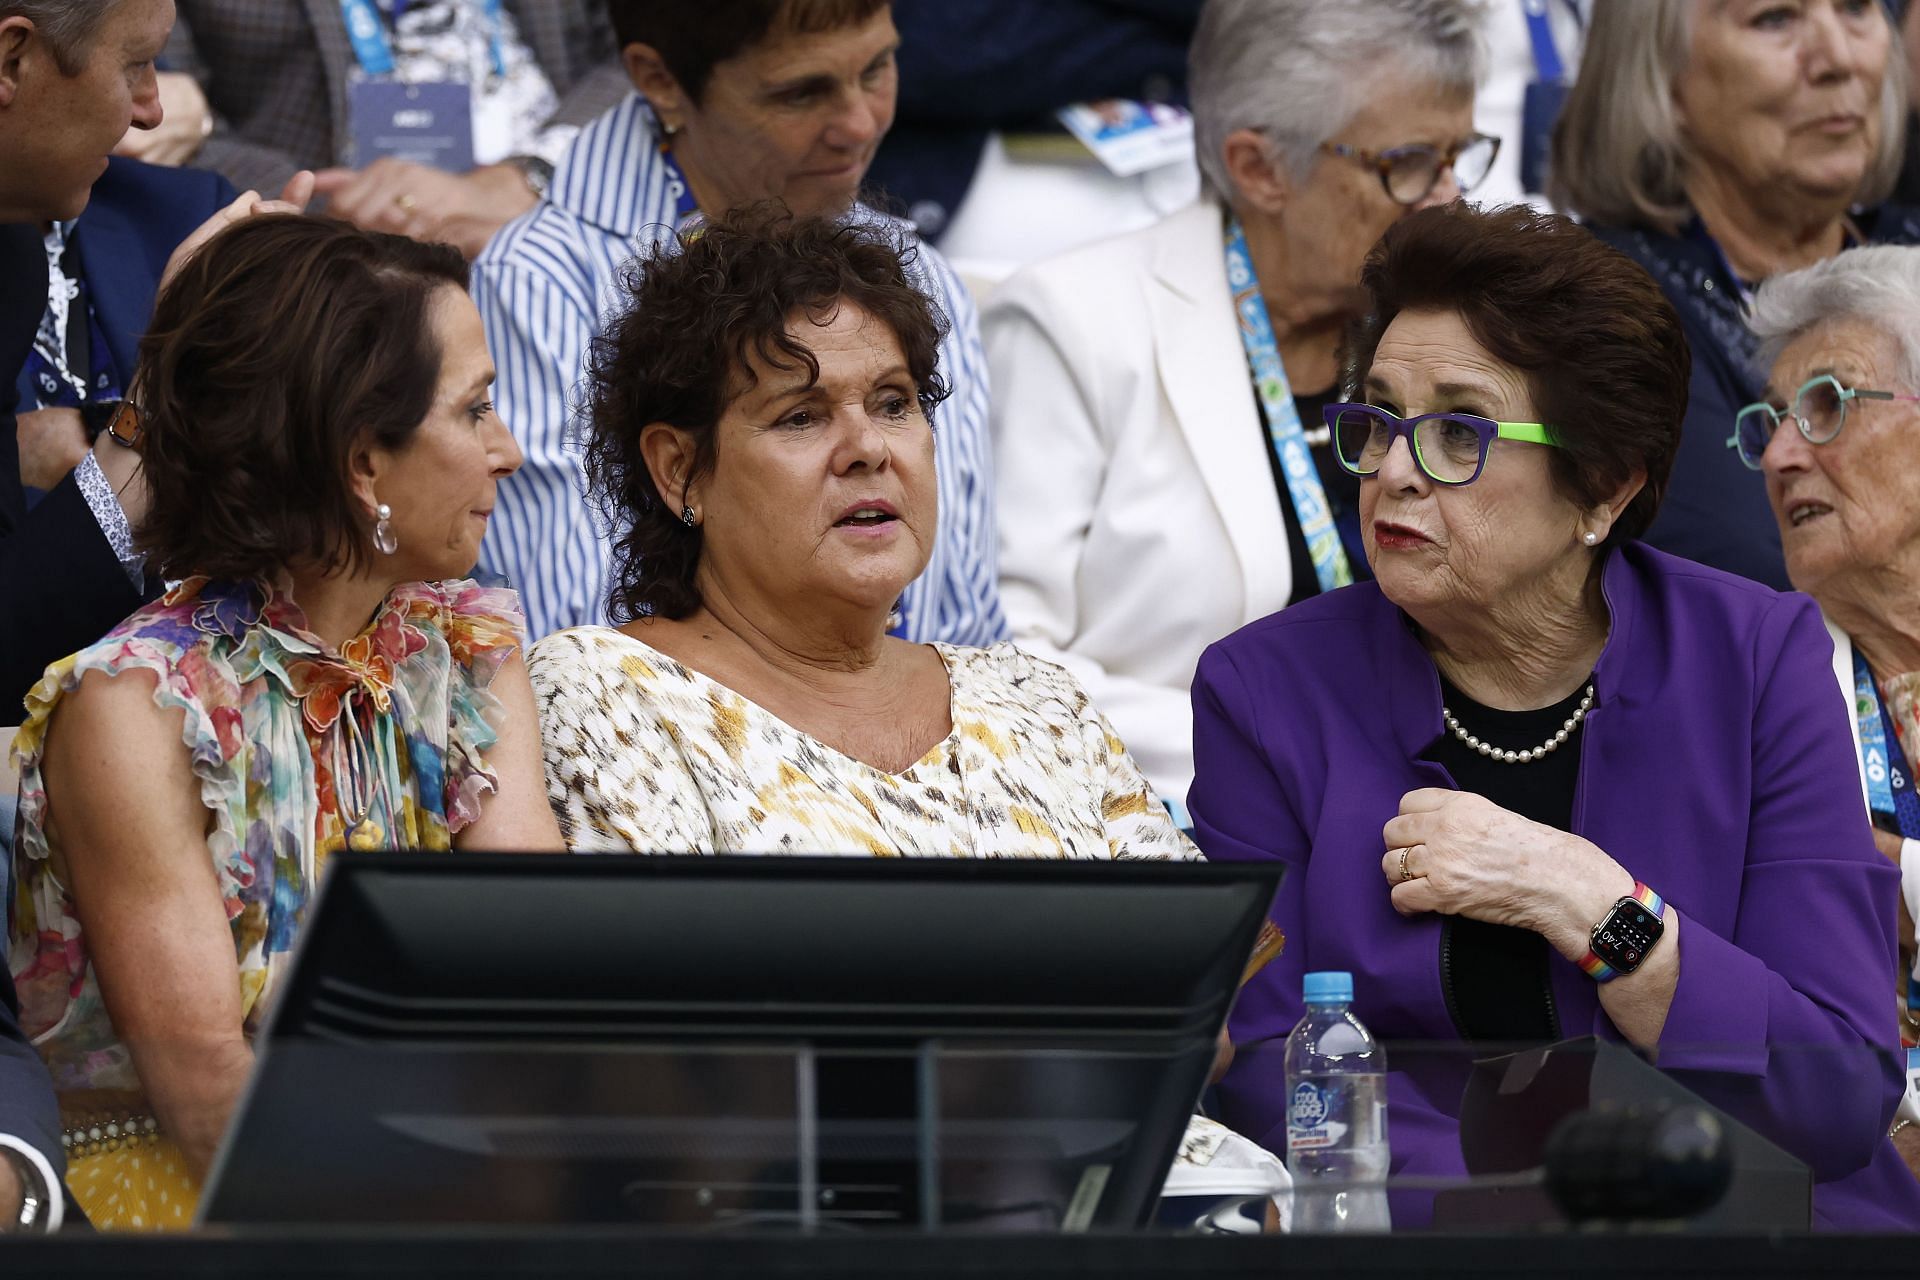 Evonne Goolagong Cawley (middle) and Billie Jean King (right)